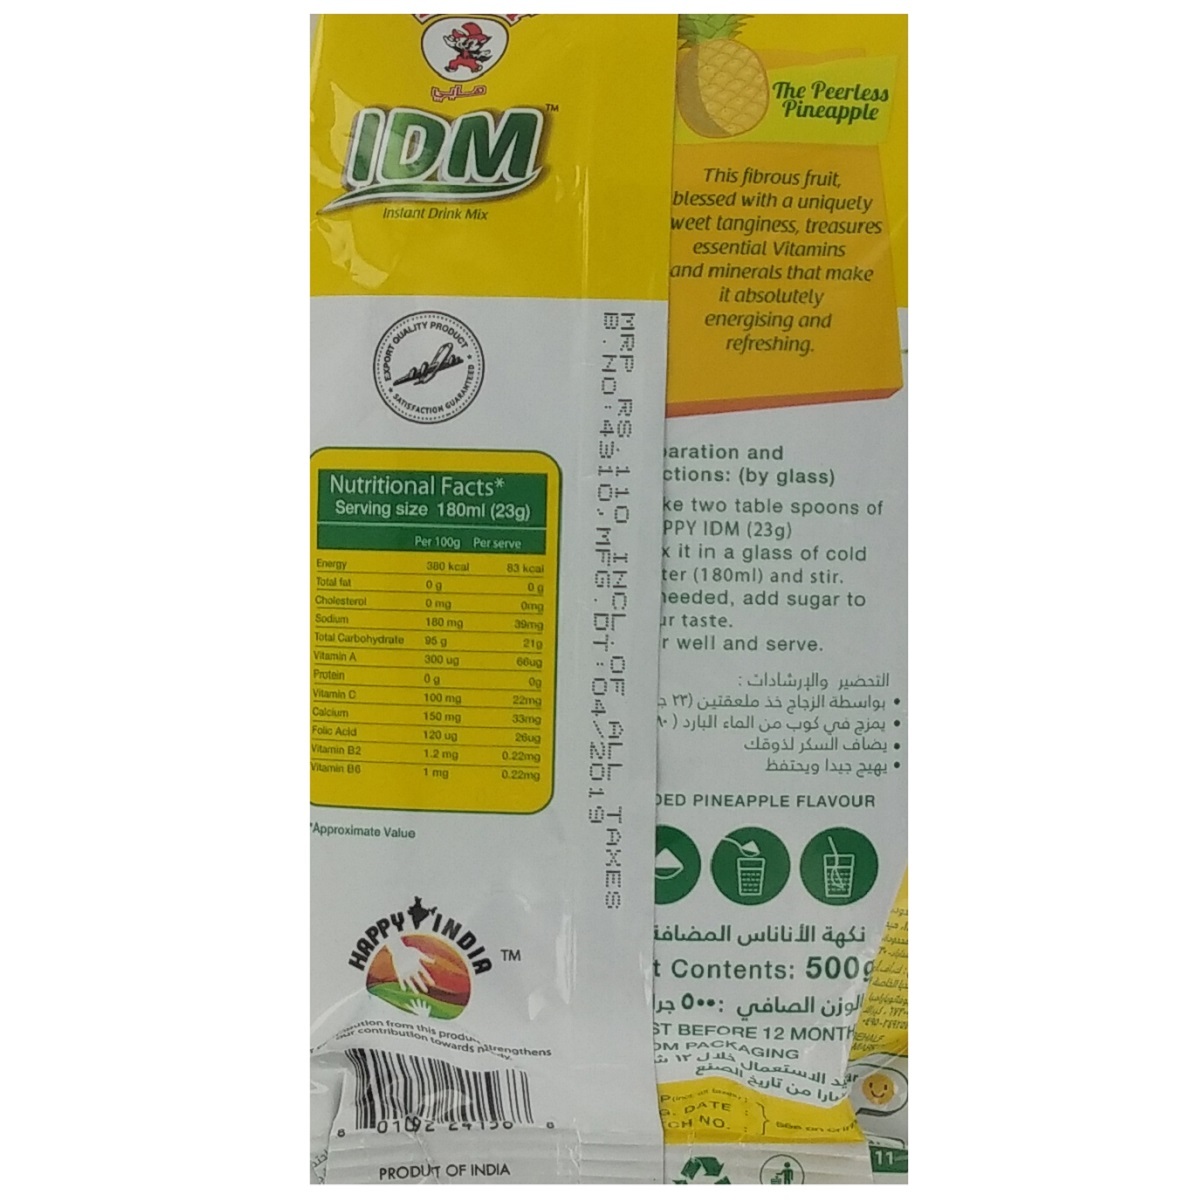 Happy Instant Drink Mix Pineapple 500g